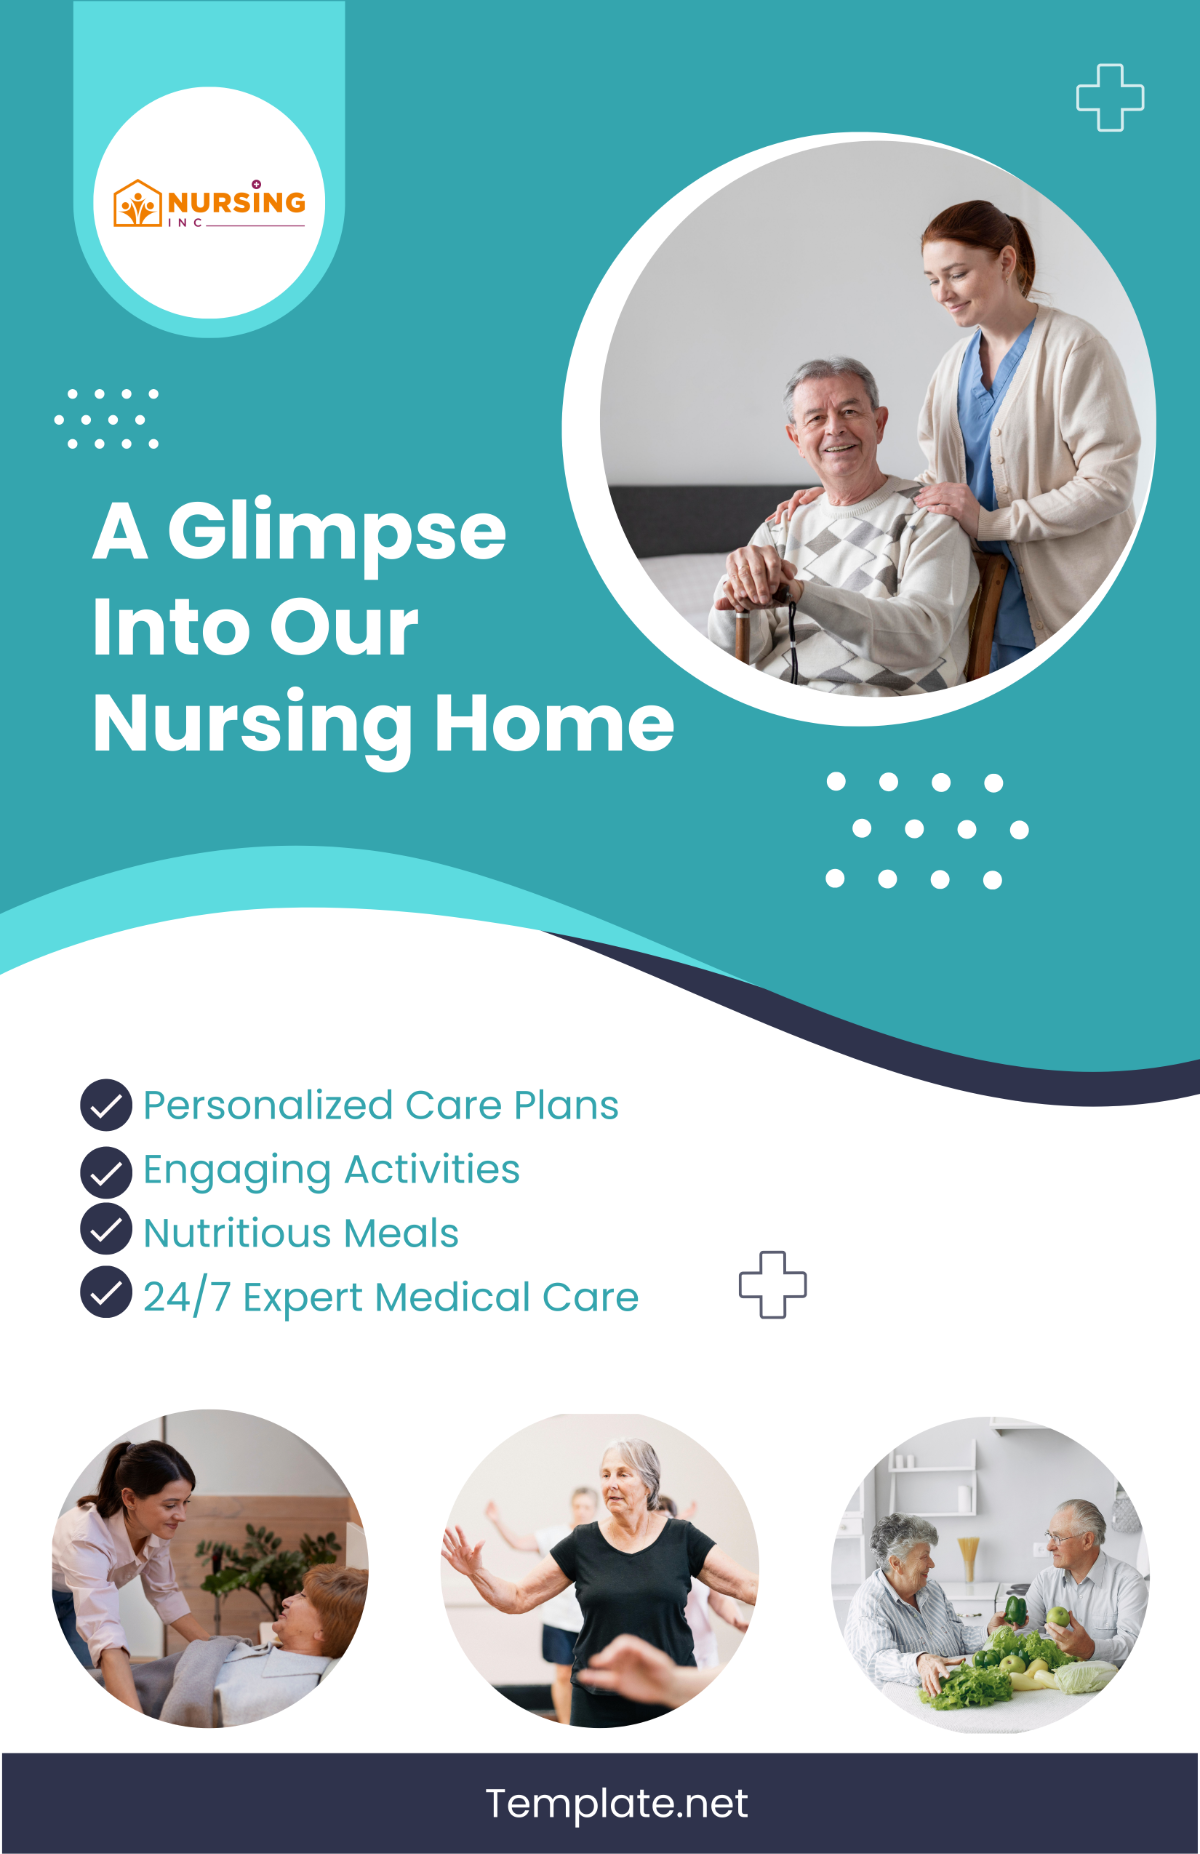 Free Welcome Home: A Glimpse into Our Nursing Home Poster Template